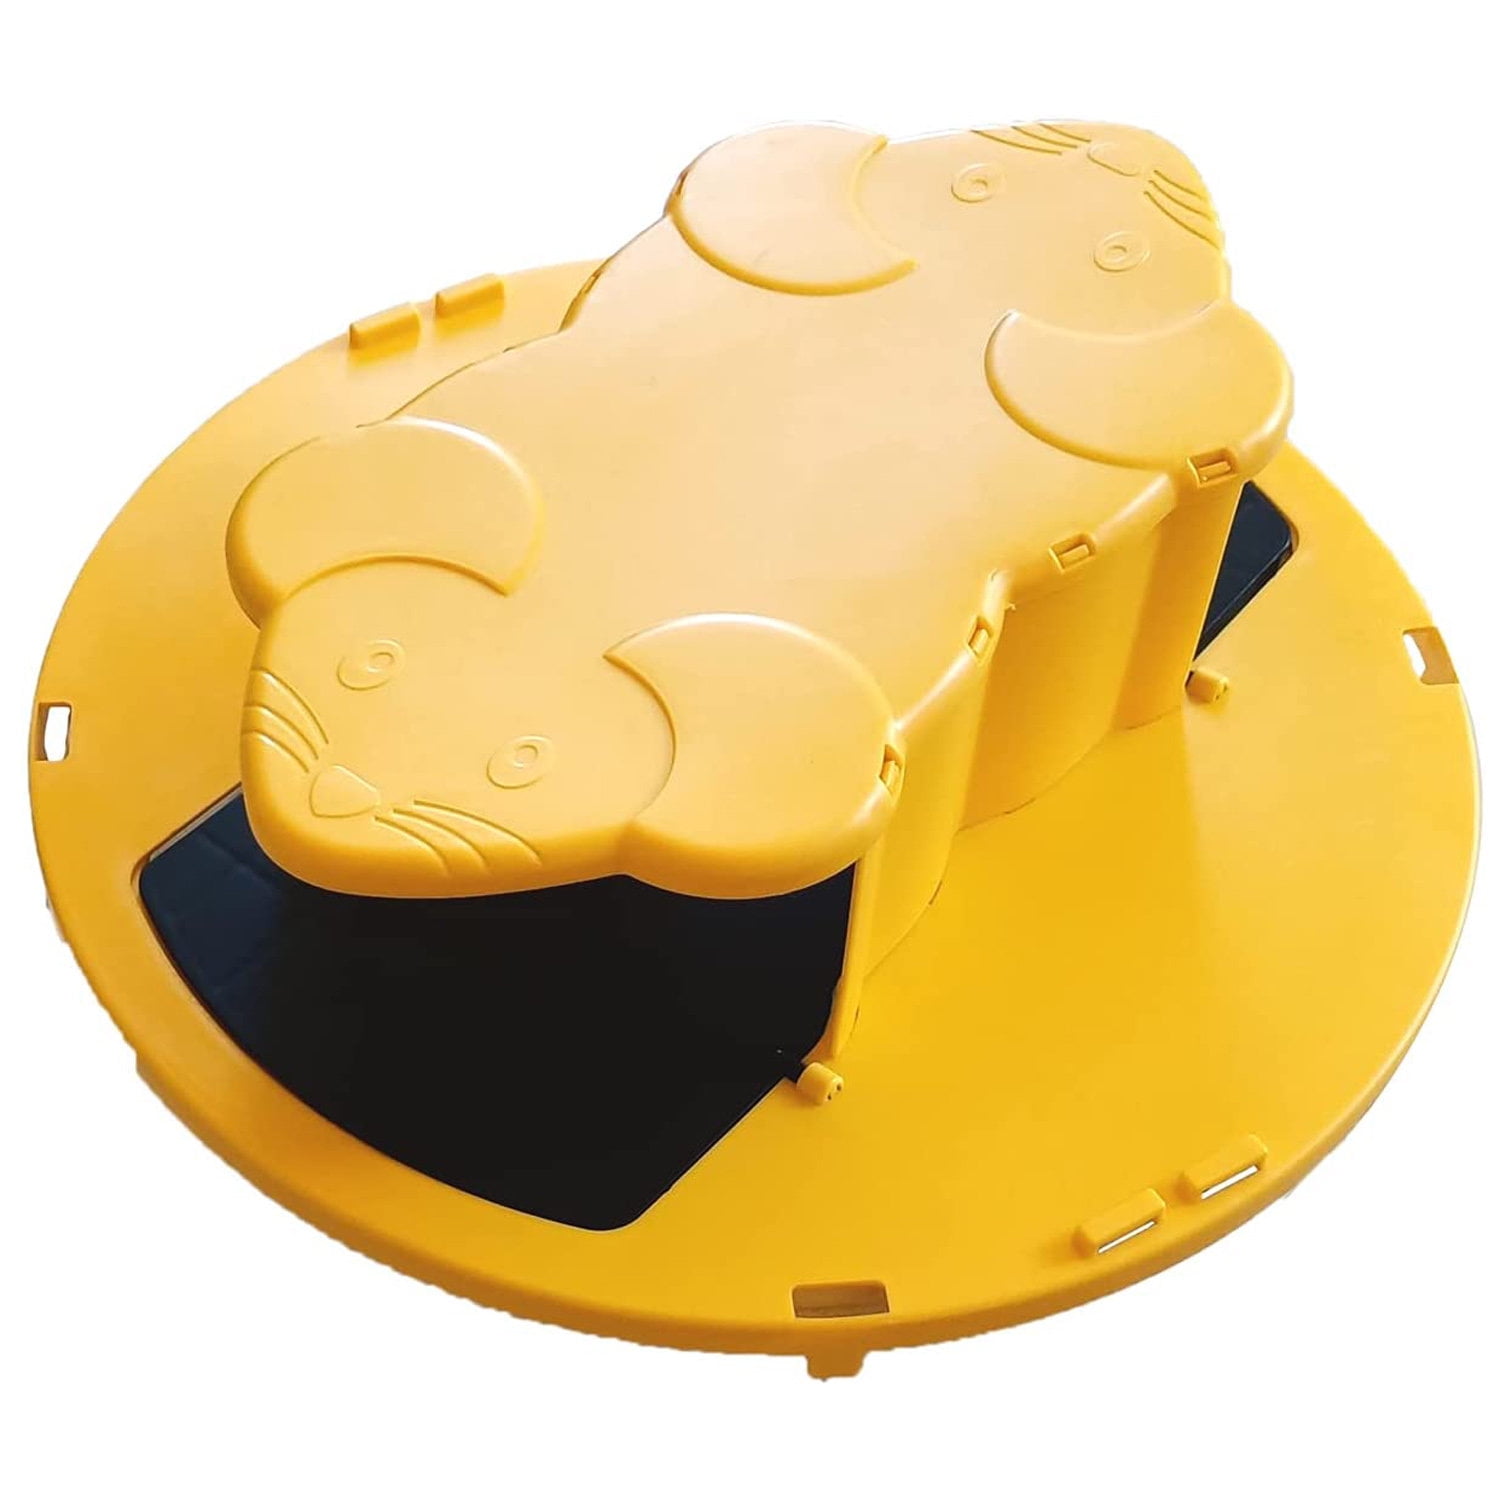 Vinmall Rat Trap Bucket, Mouse Trap with Ladder, Reusable Auto Reset D –  iFanze